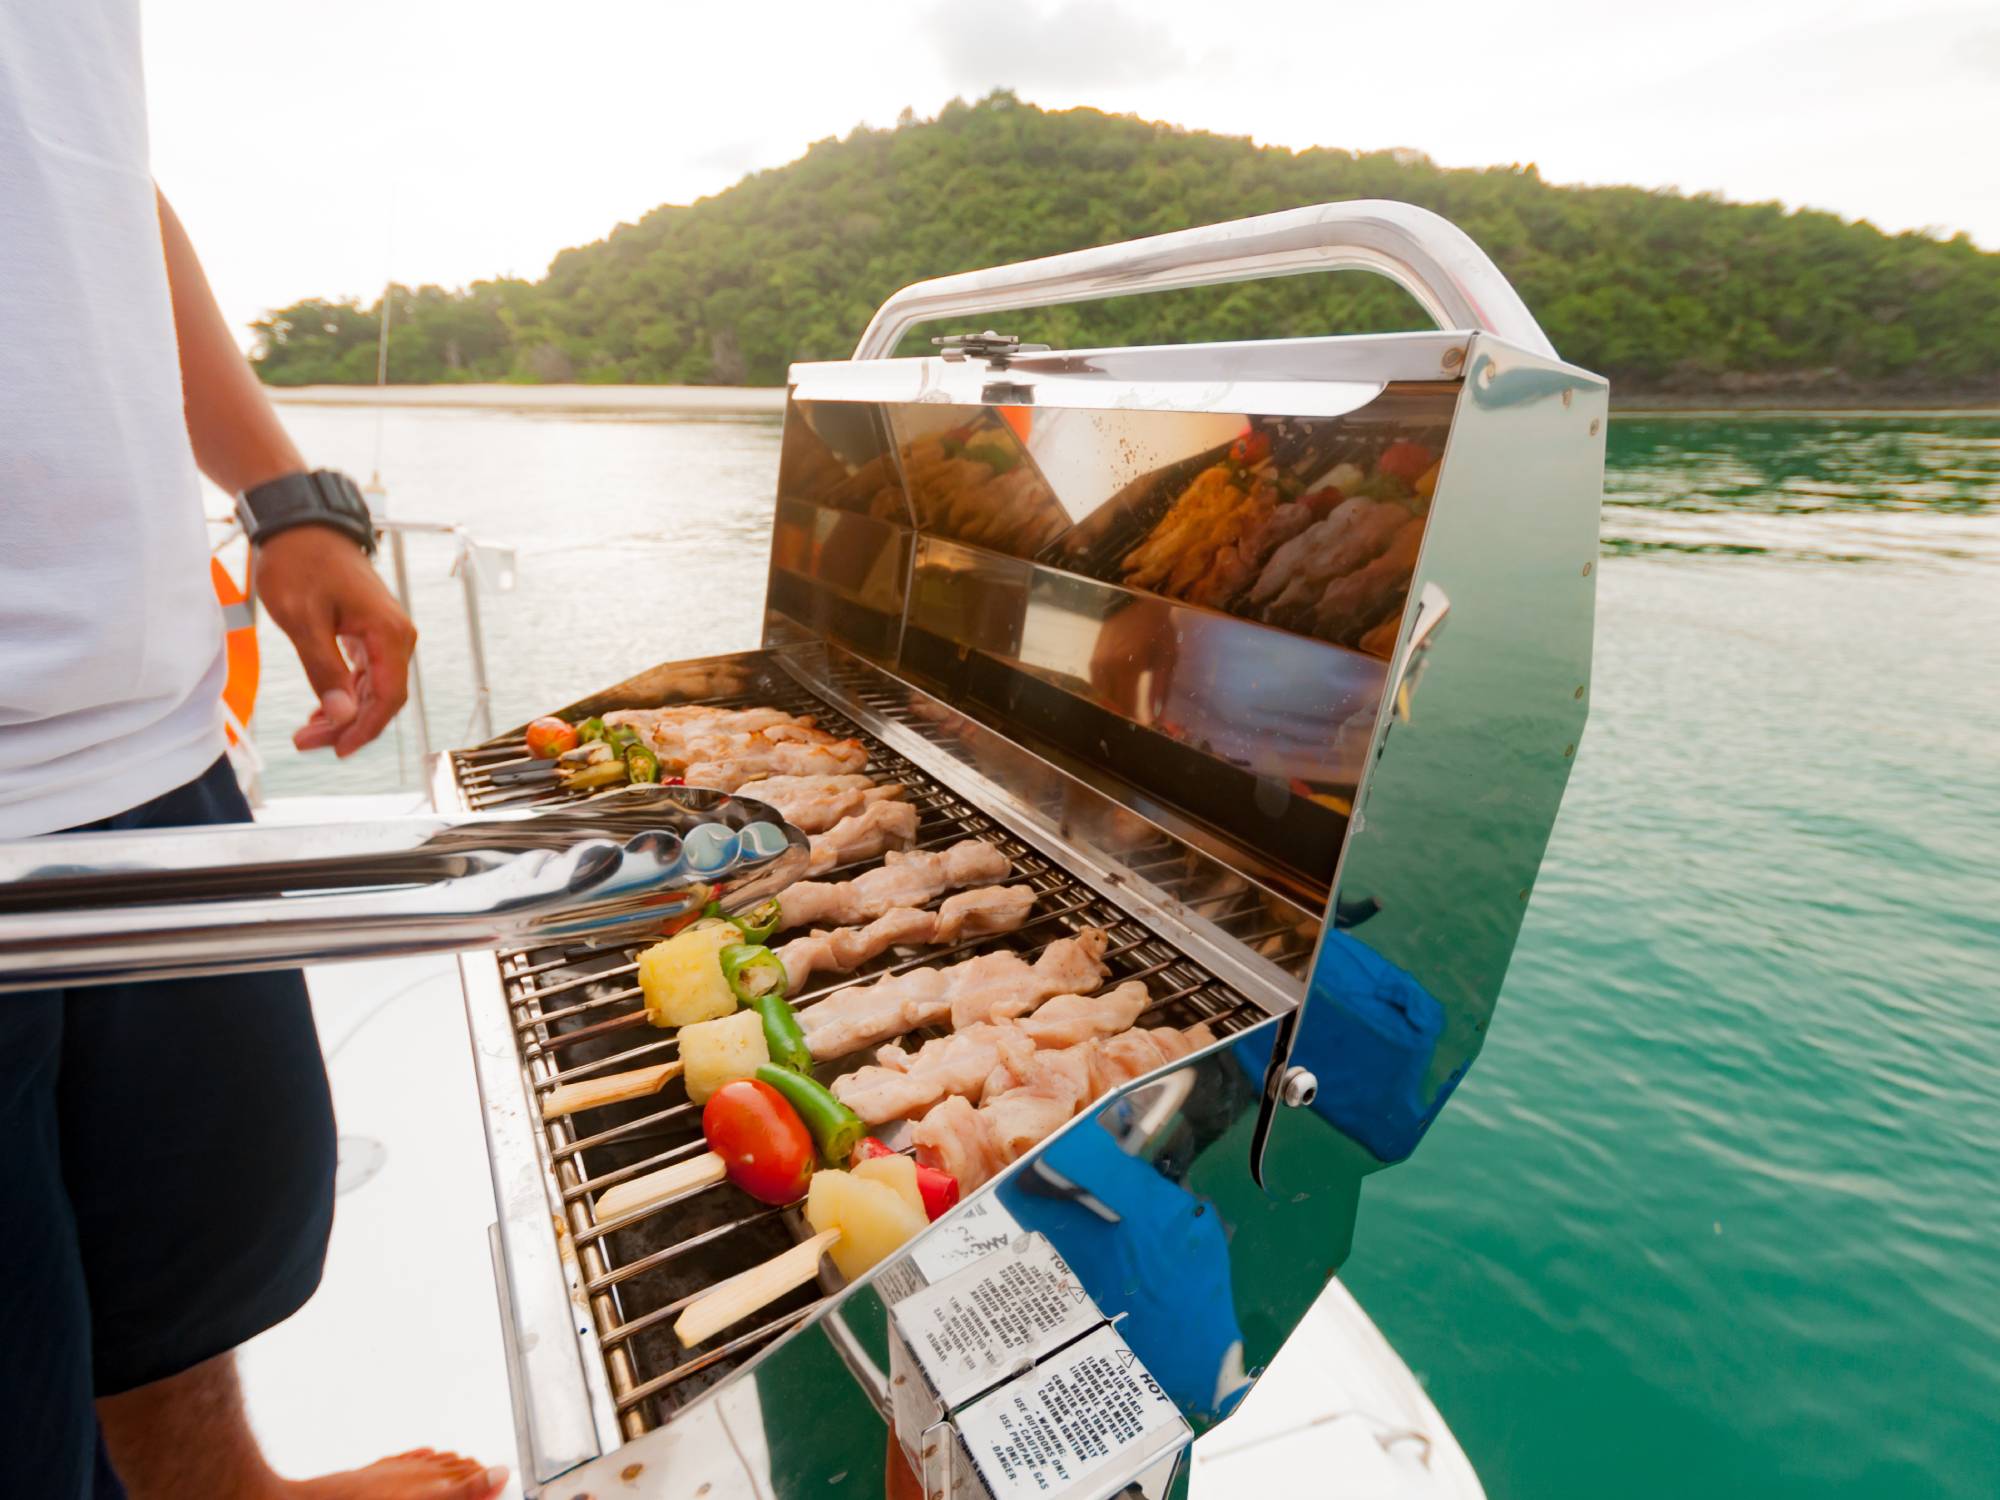 A sleek chrome grill is cooking up some delicious looking skewers. The grill is on a boat in the middle of a gorgeous lake.